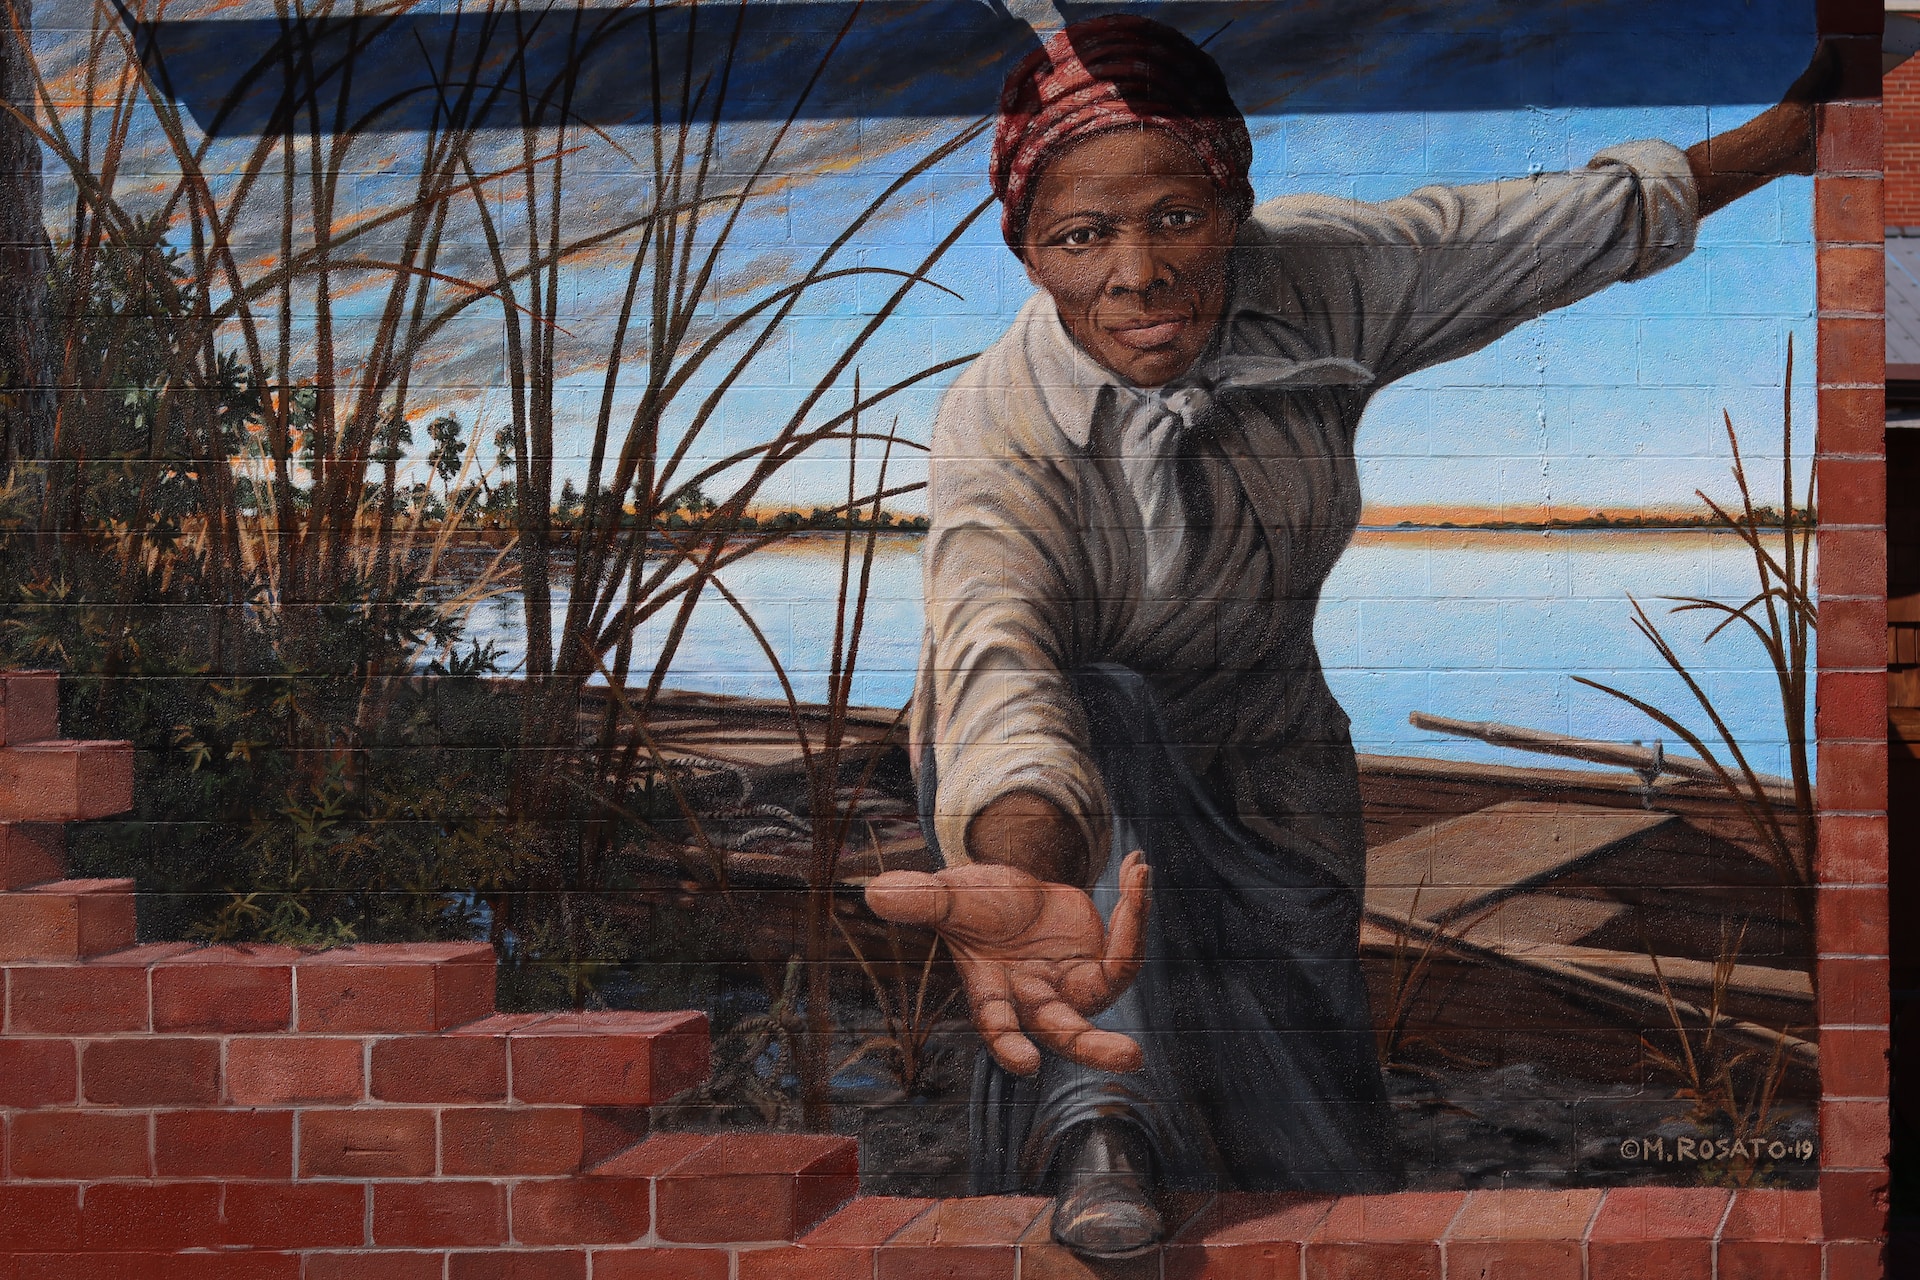 Harriet Tubman engineered her first rescue mission as part of the Underground Railroad